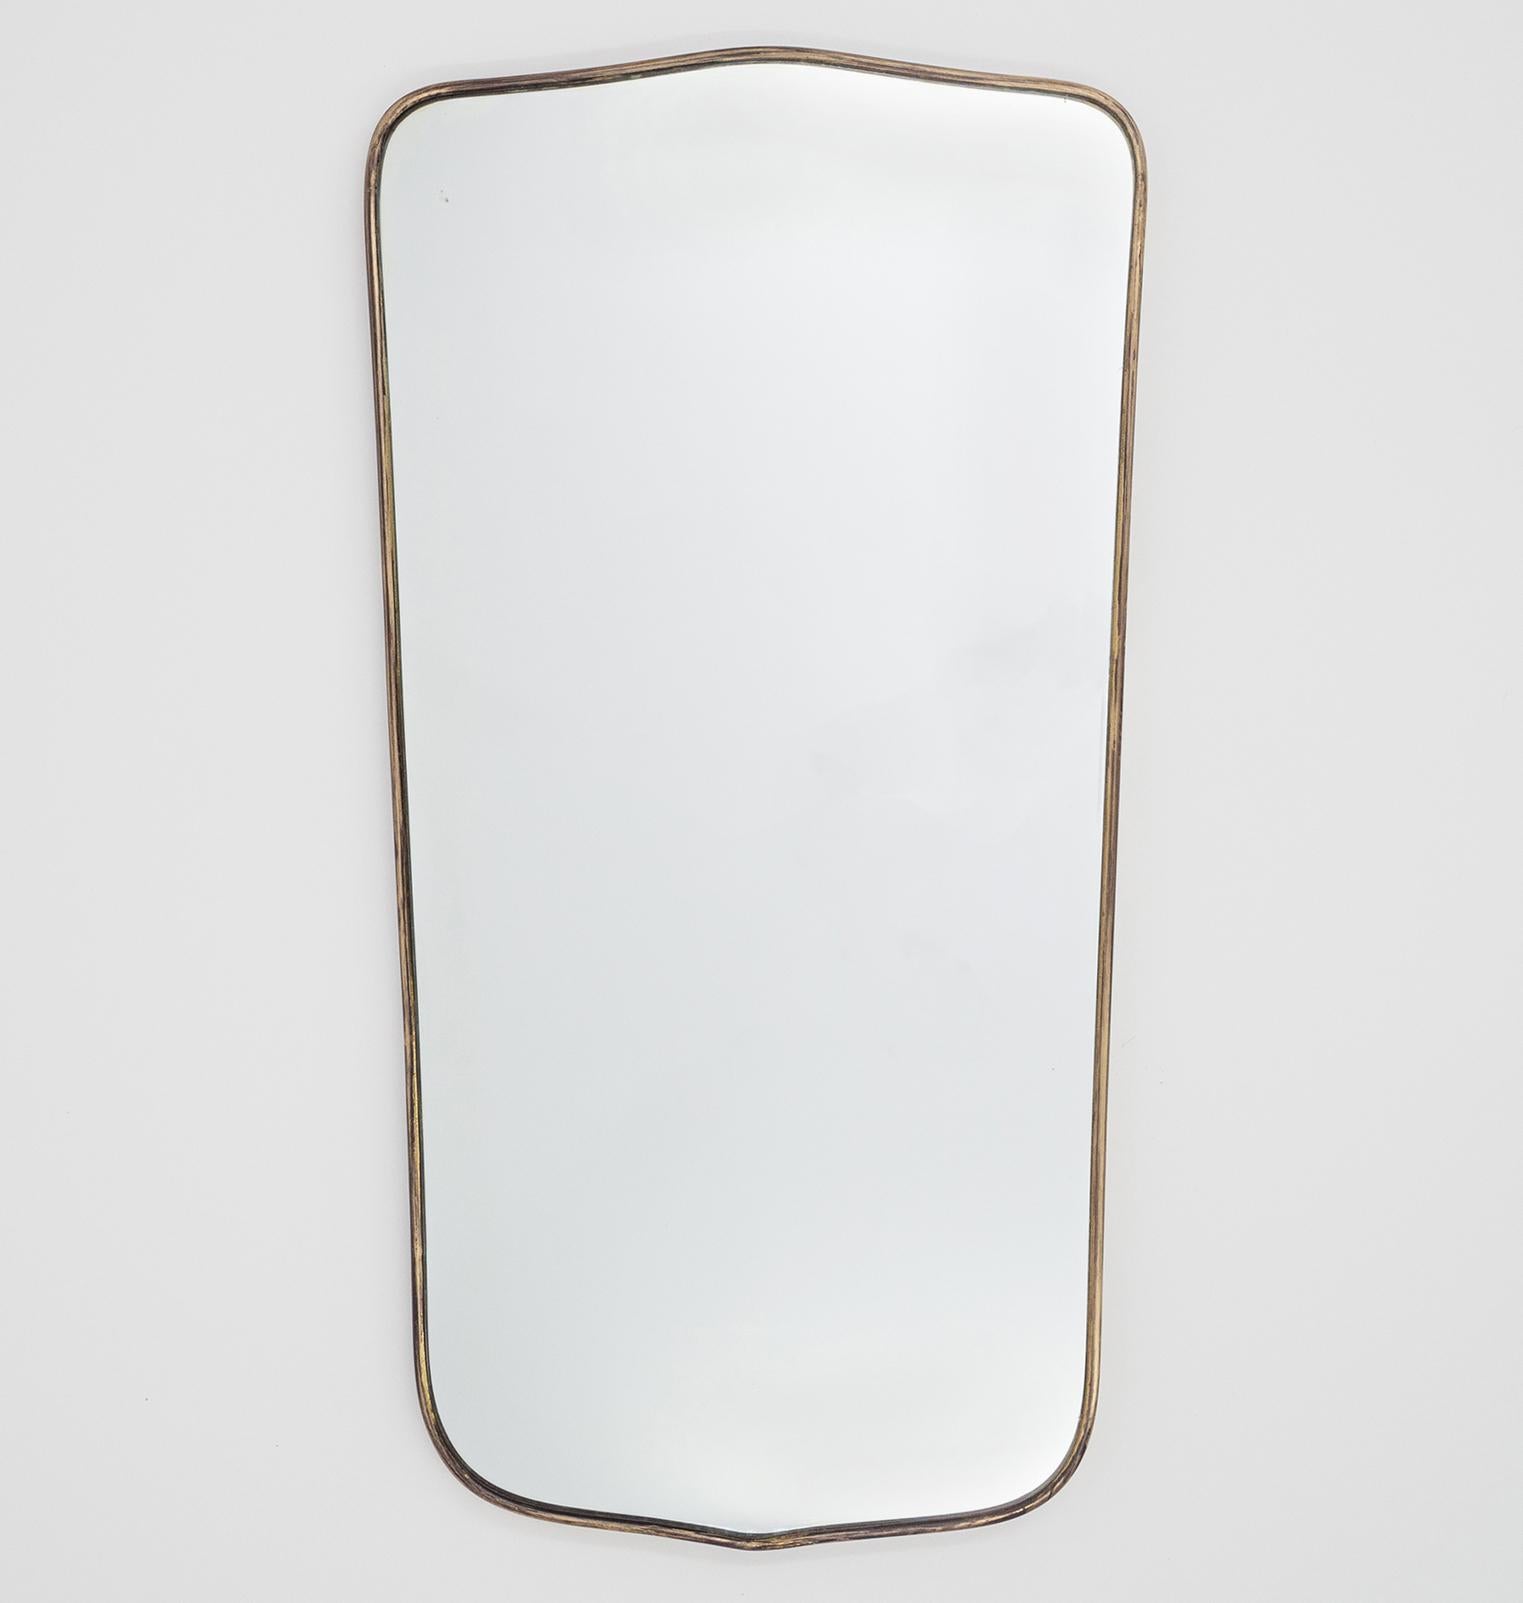 Fine Italian brass mirror from the 1950s. Slender, slightly tapered design with original, silvery tinted mirror. There is a lovely patina on the brass and a few specks and light scratches on the mirror. Width on the bottom is 13.4 inches/34 cm.